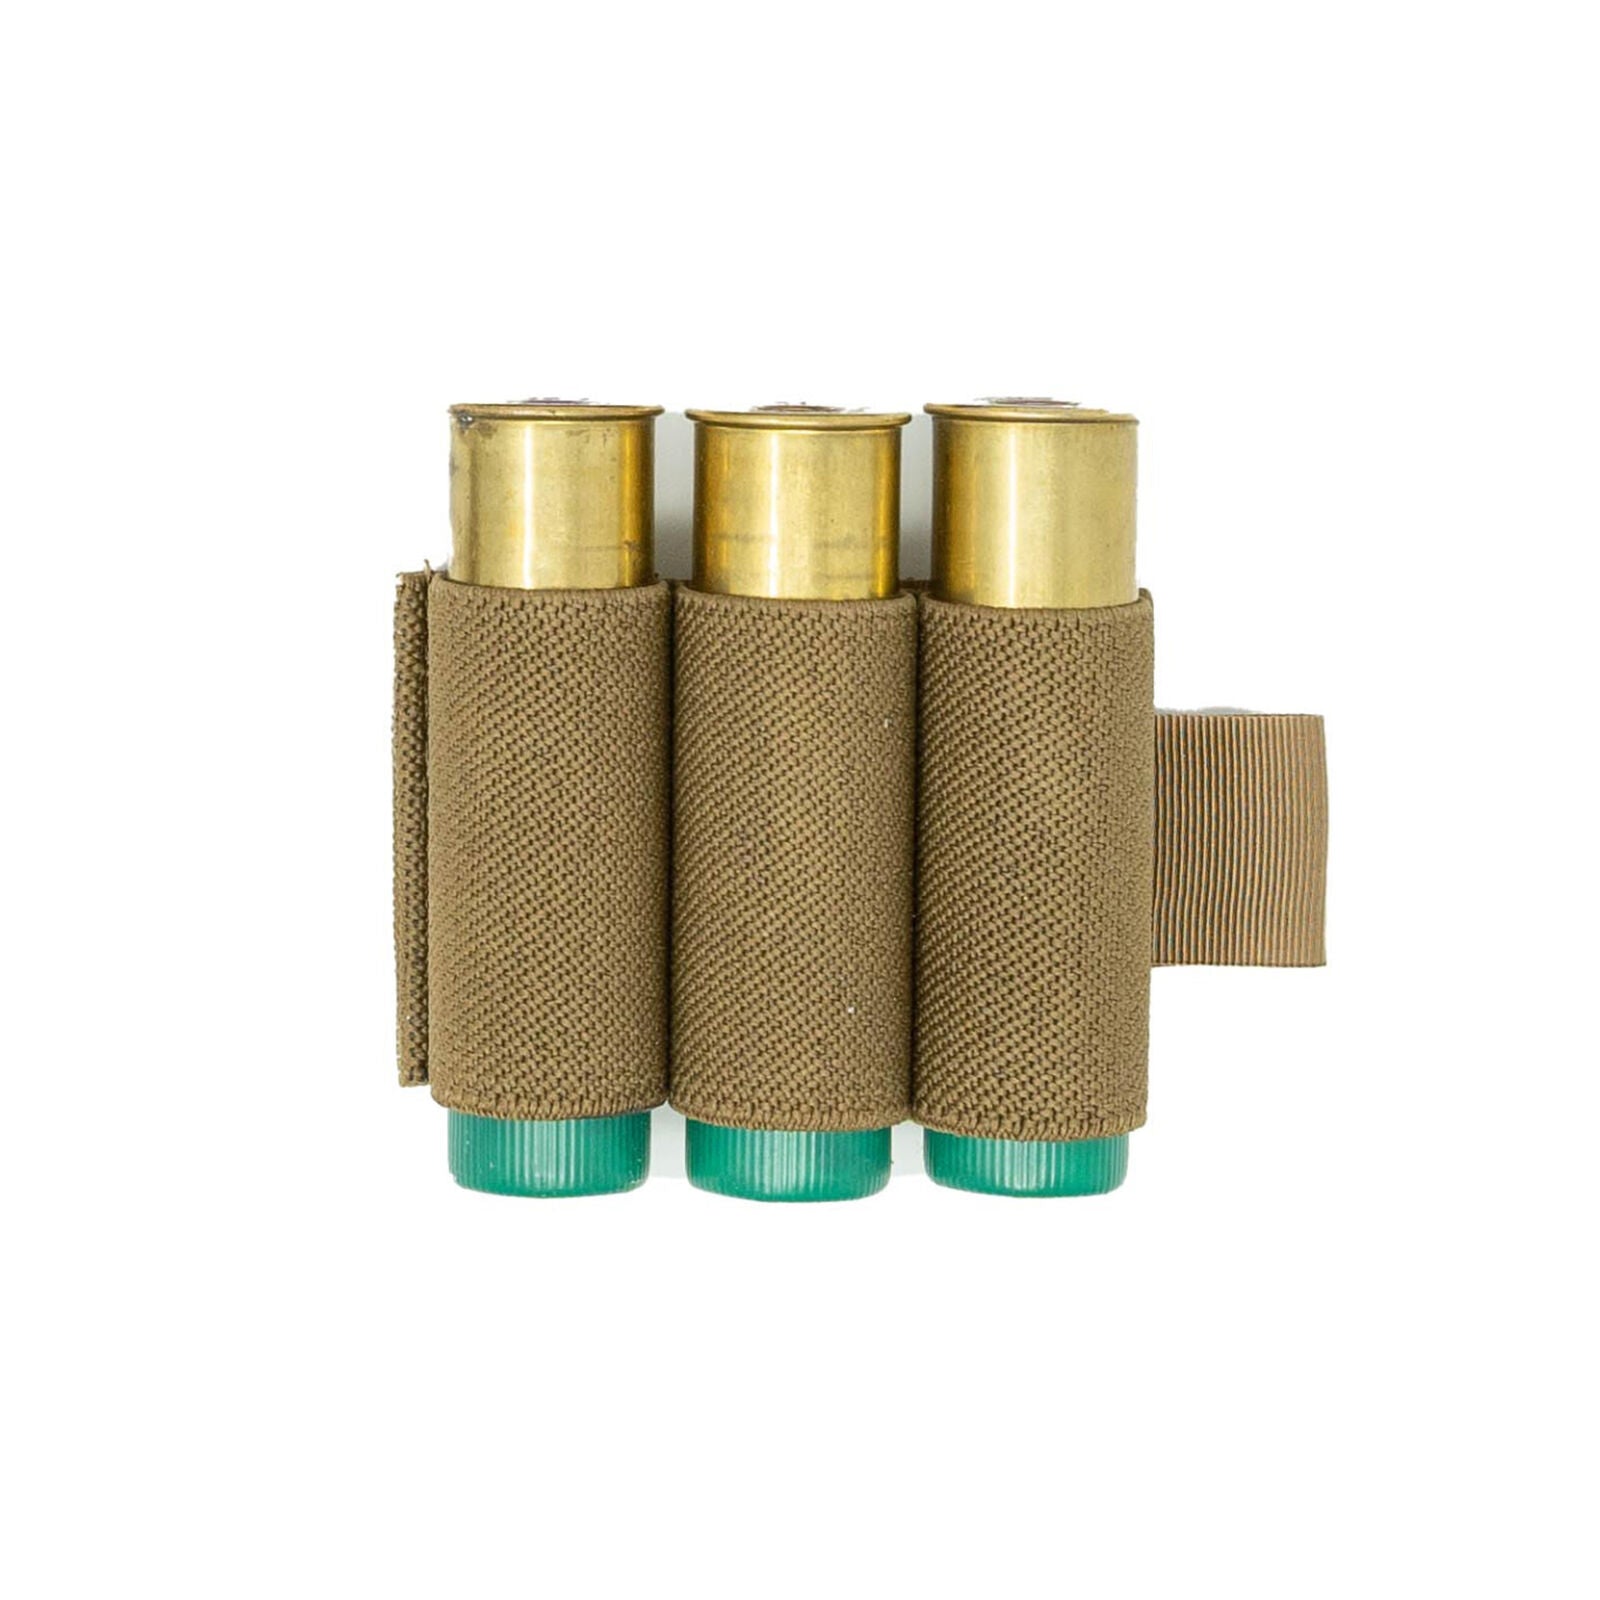 FHF Gear 3 Round Shot Shell Holder Loaded